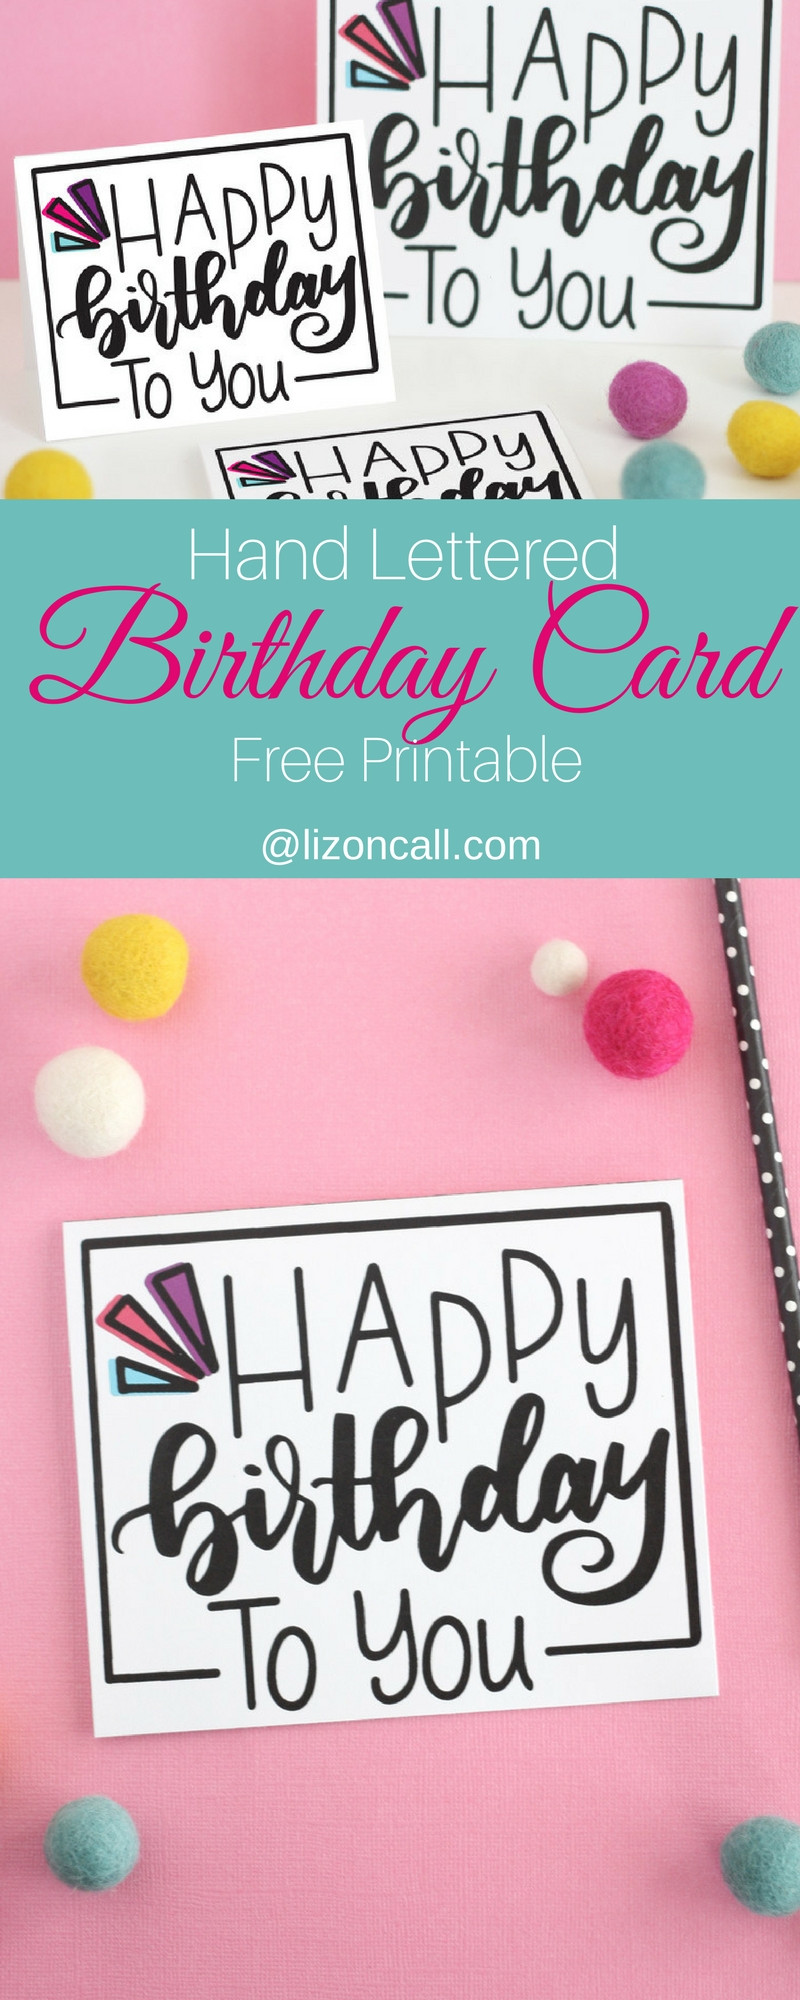 Printable Free Birthday Cards
 Hand Lettered Free Printable Birthday Card Liz on Call